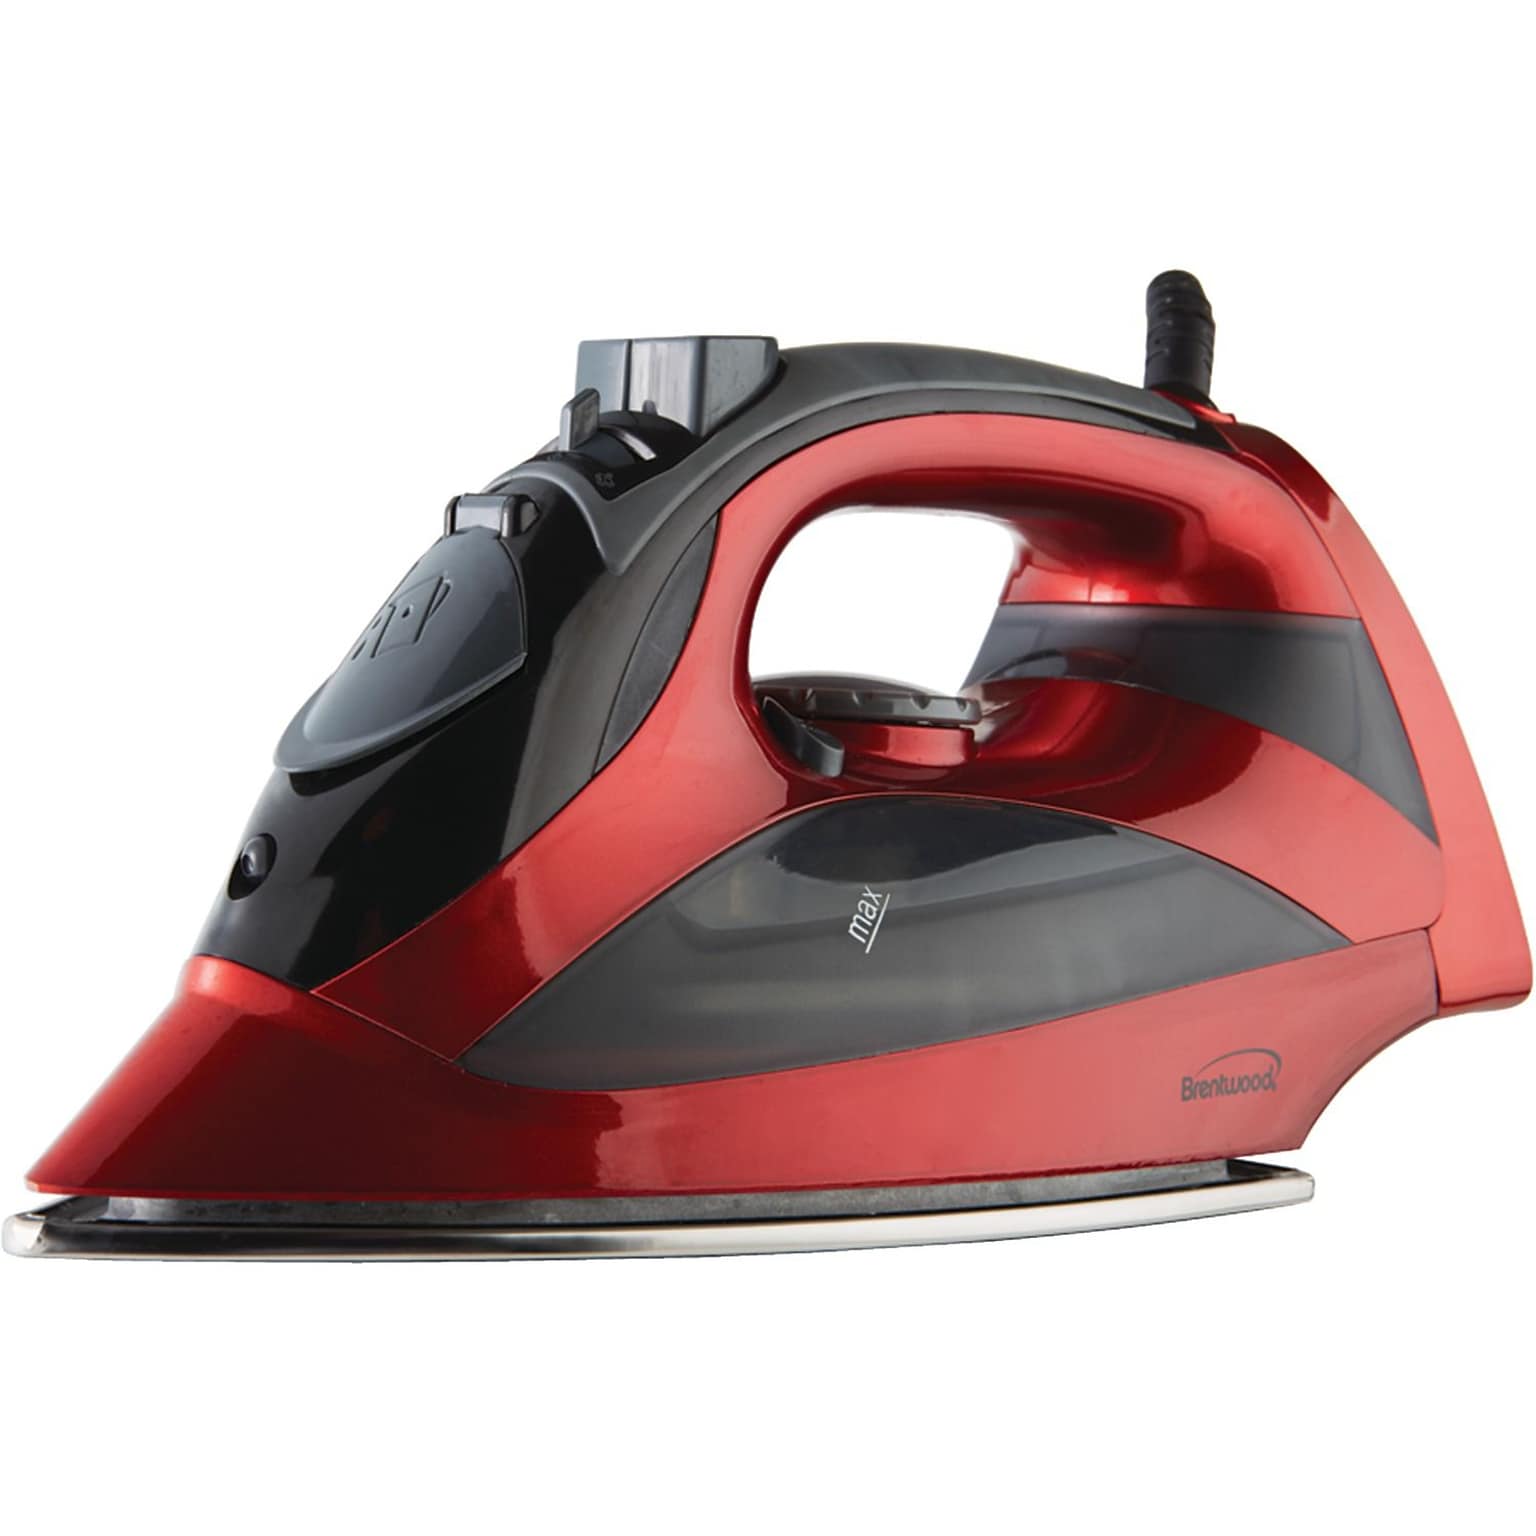 Brentwood MPI-90R Steam Iron With Auto Shut-OFF (Red)